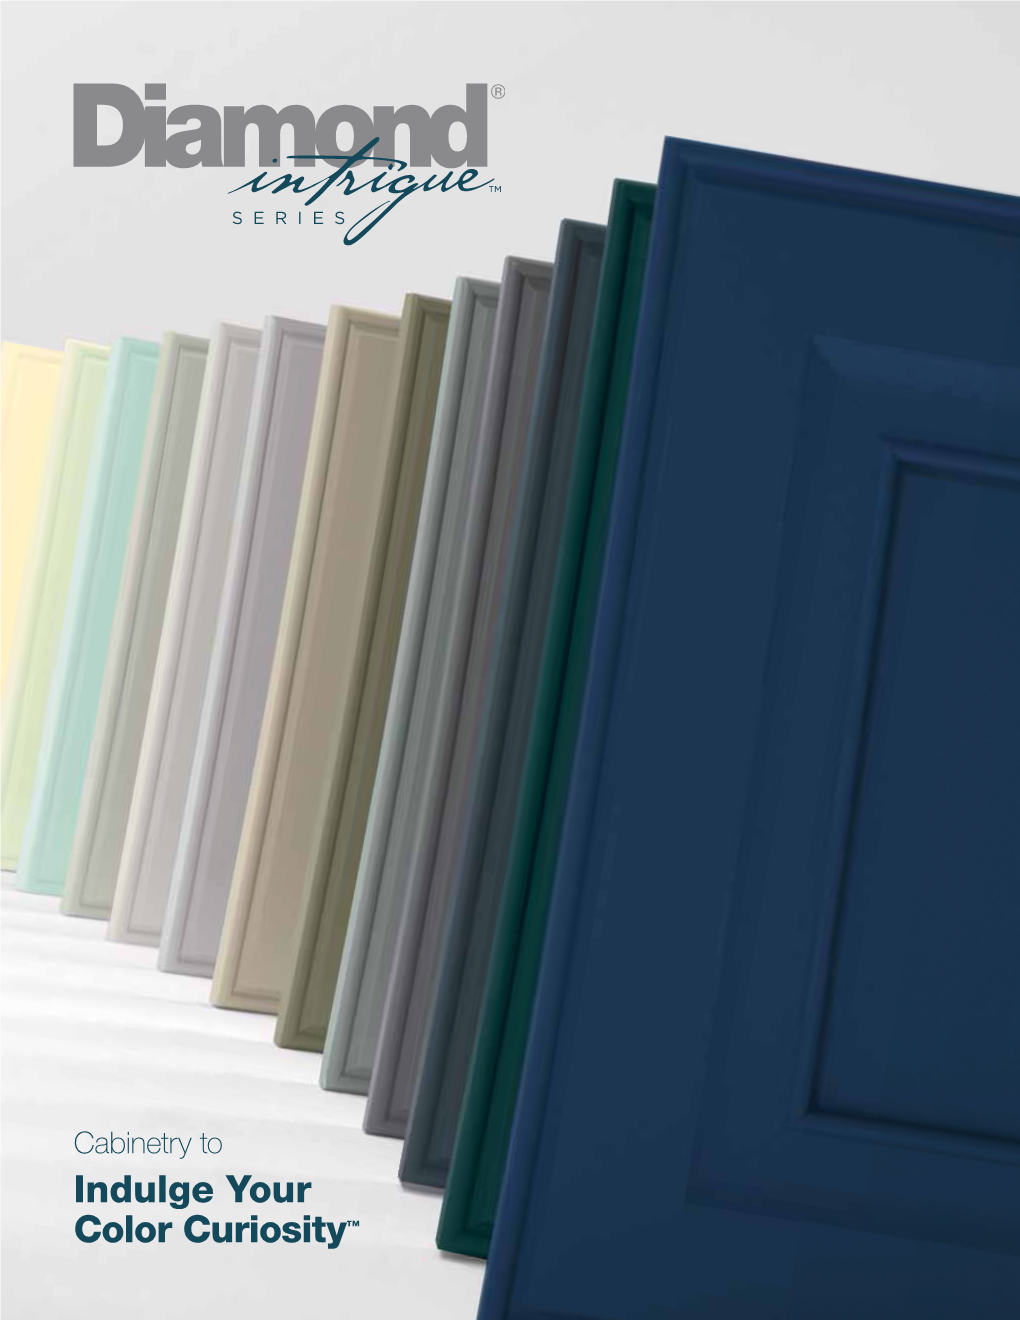 Cabinetry to Indulge Your Color Curiosity™ Introducing the New Diamond® Intrigue™ Series, Found Exclusively at Lowe’S!